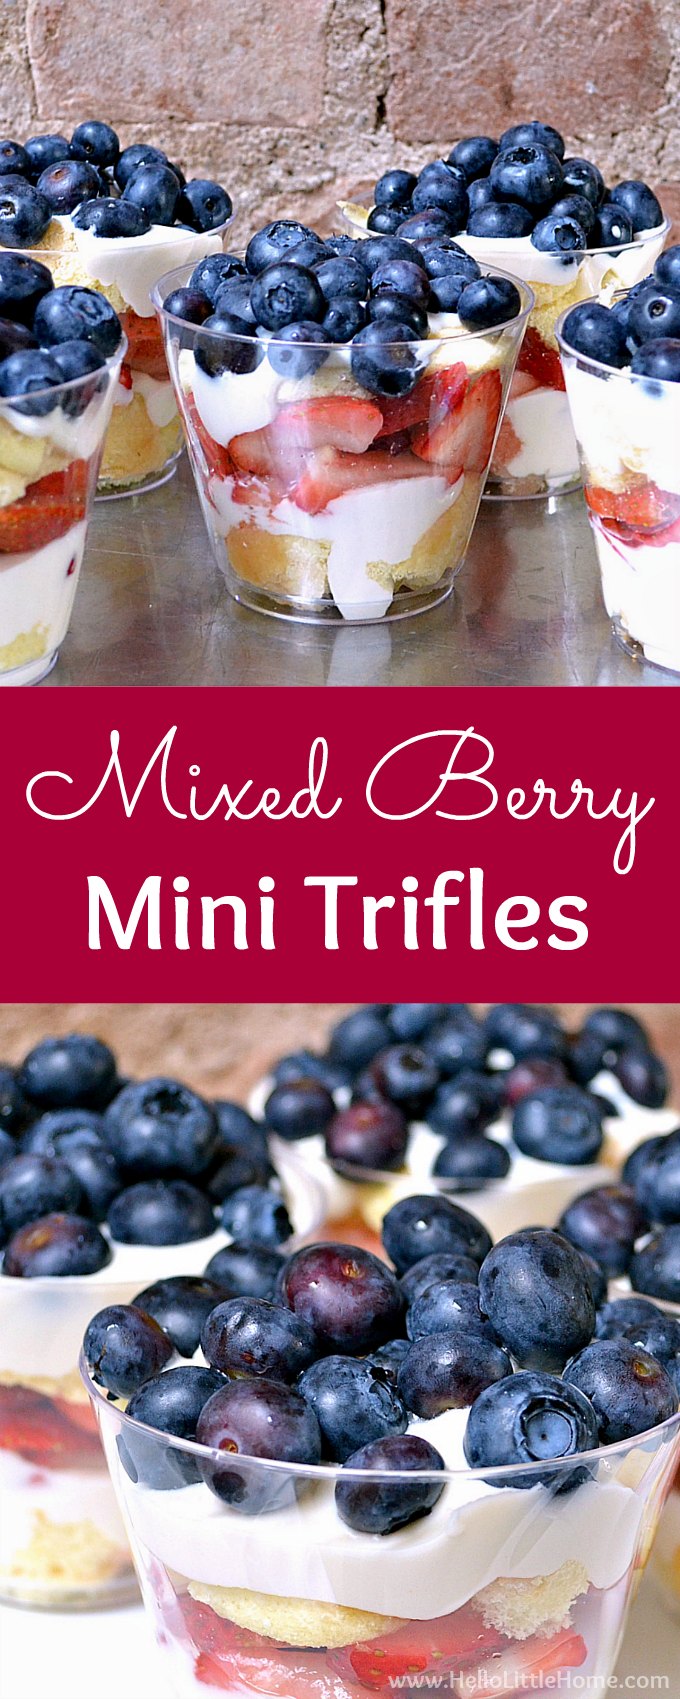 A collage of different Mixed Berry Mini Trifle photos.